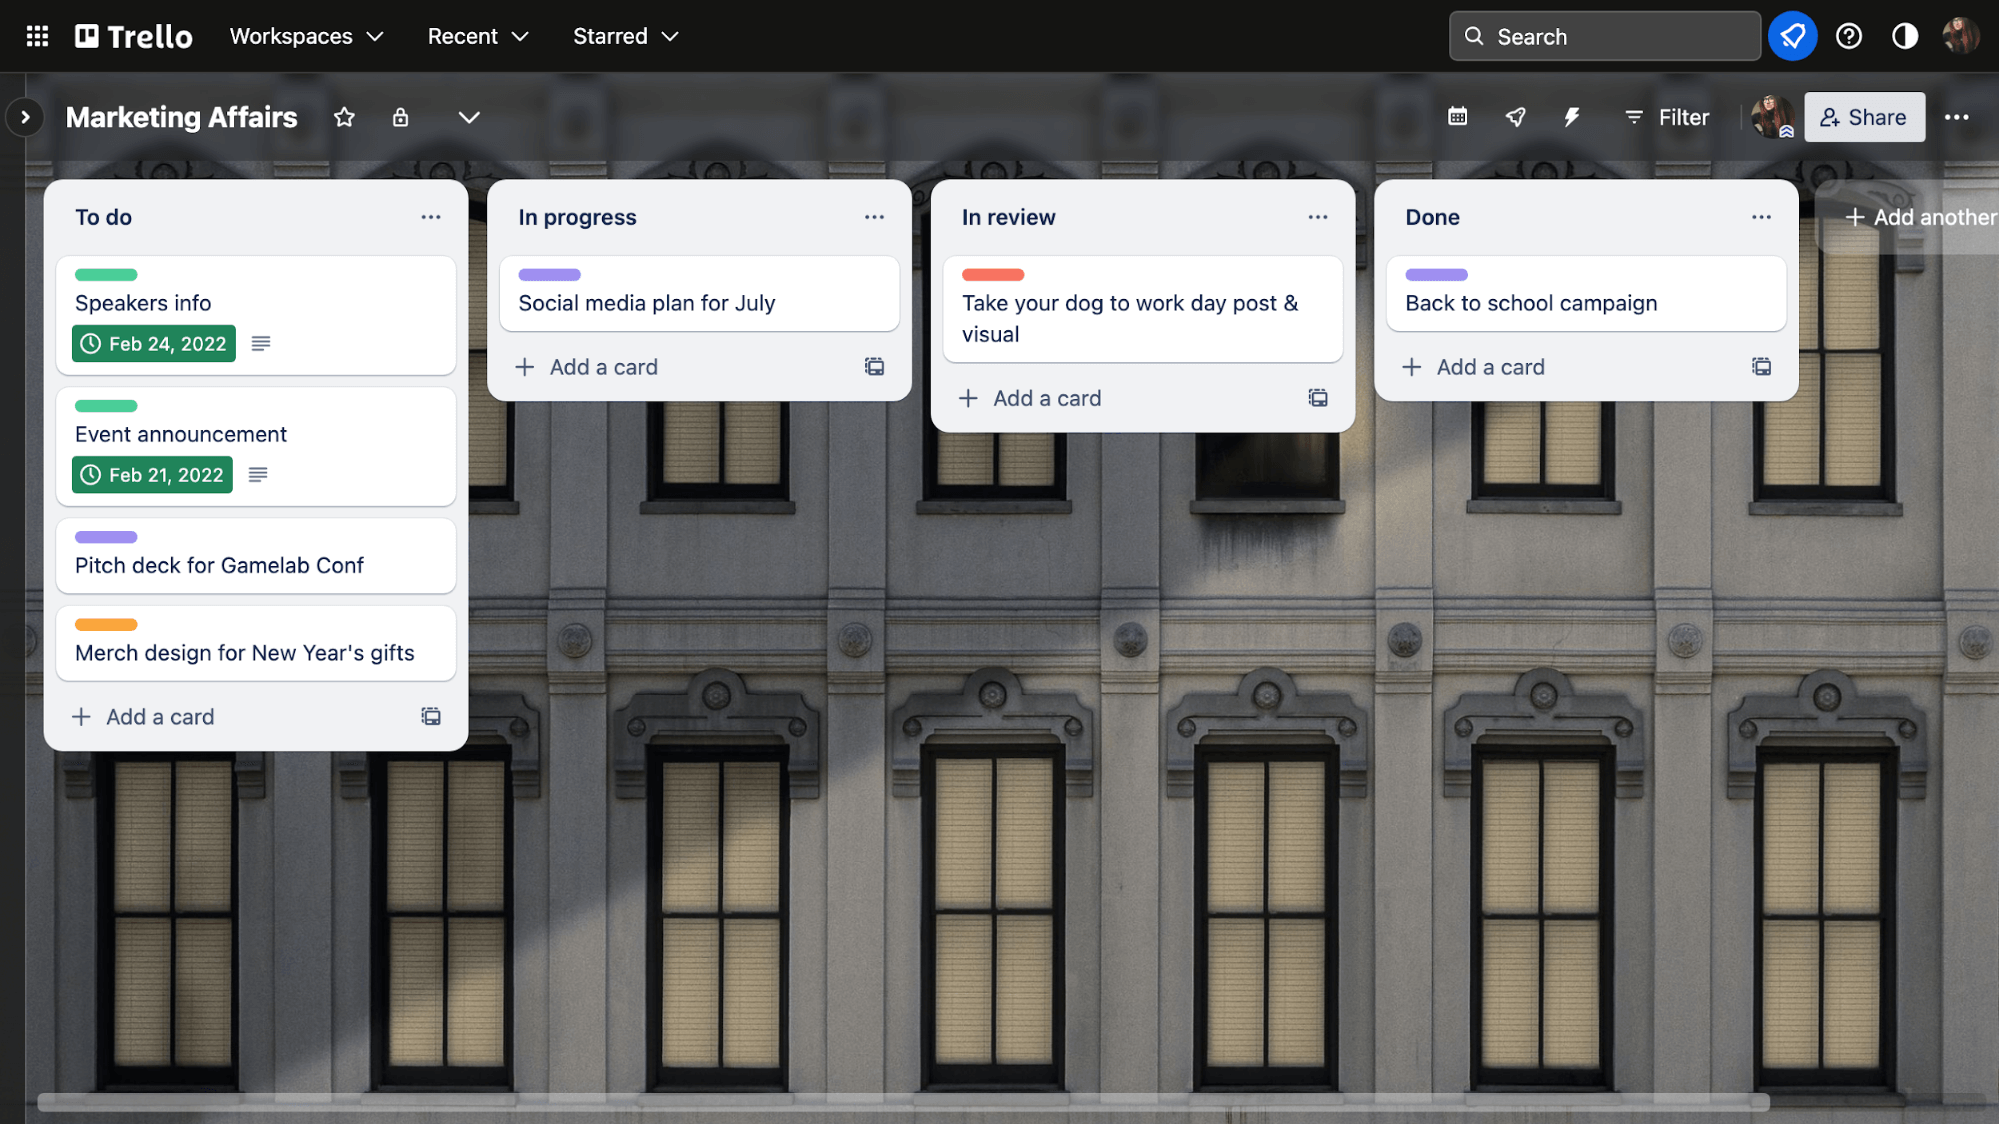 Trello marketing affairs dashboard with column statuses for to do, progress, in review and done.